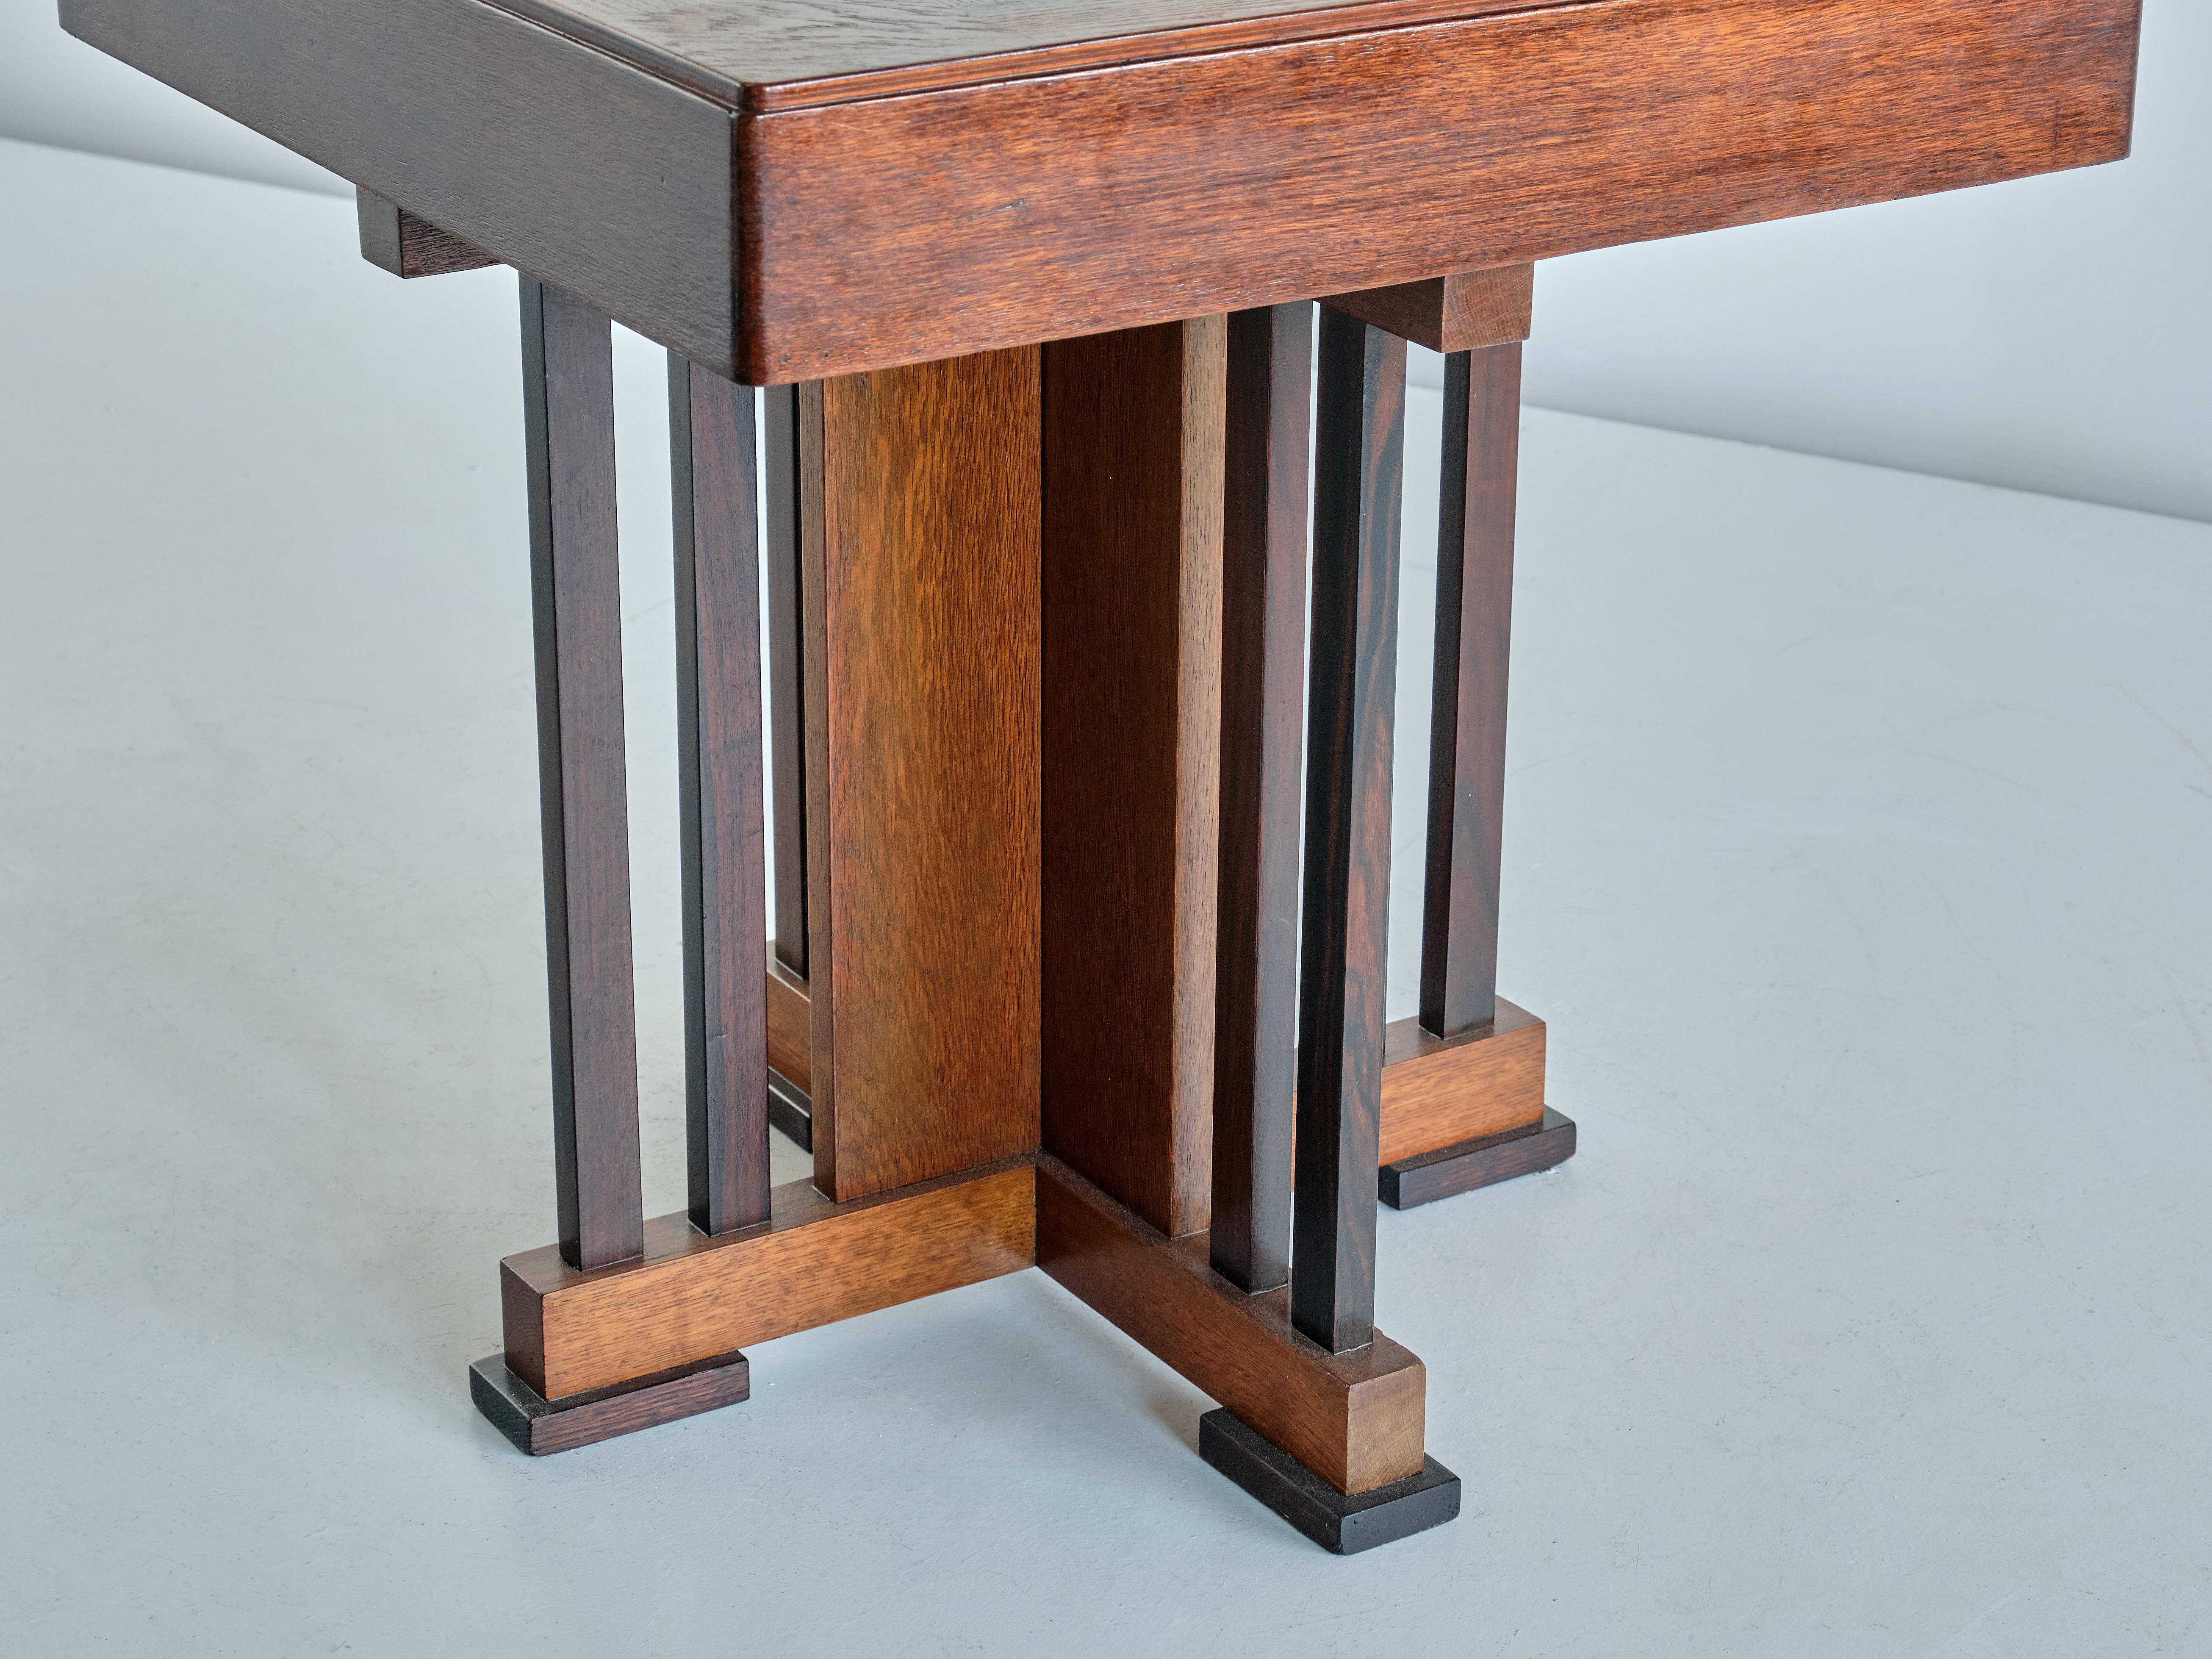 Mid-20th Century P.E.L. Izeren Side Table in Oak and Macassar Ebony, Netherlands, 1930s For Sale